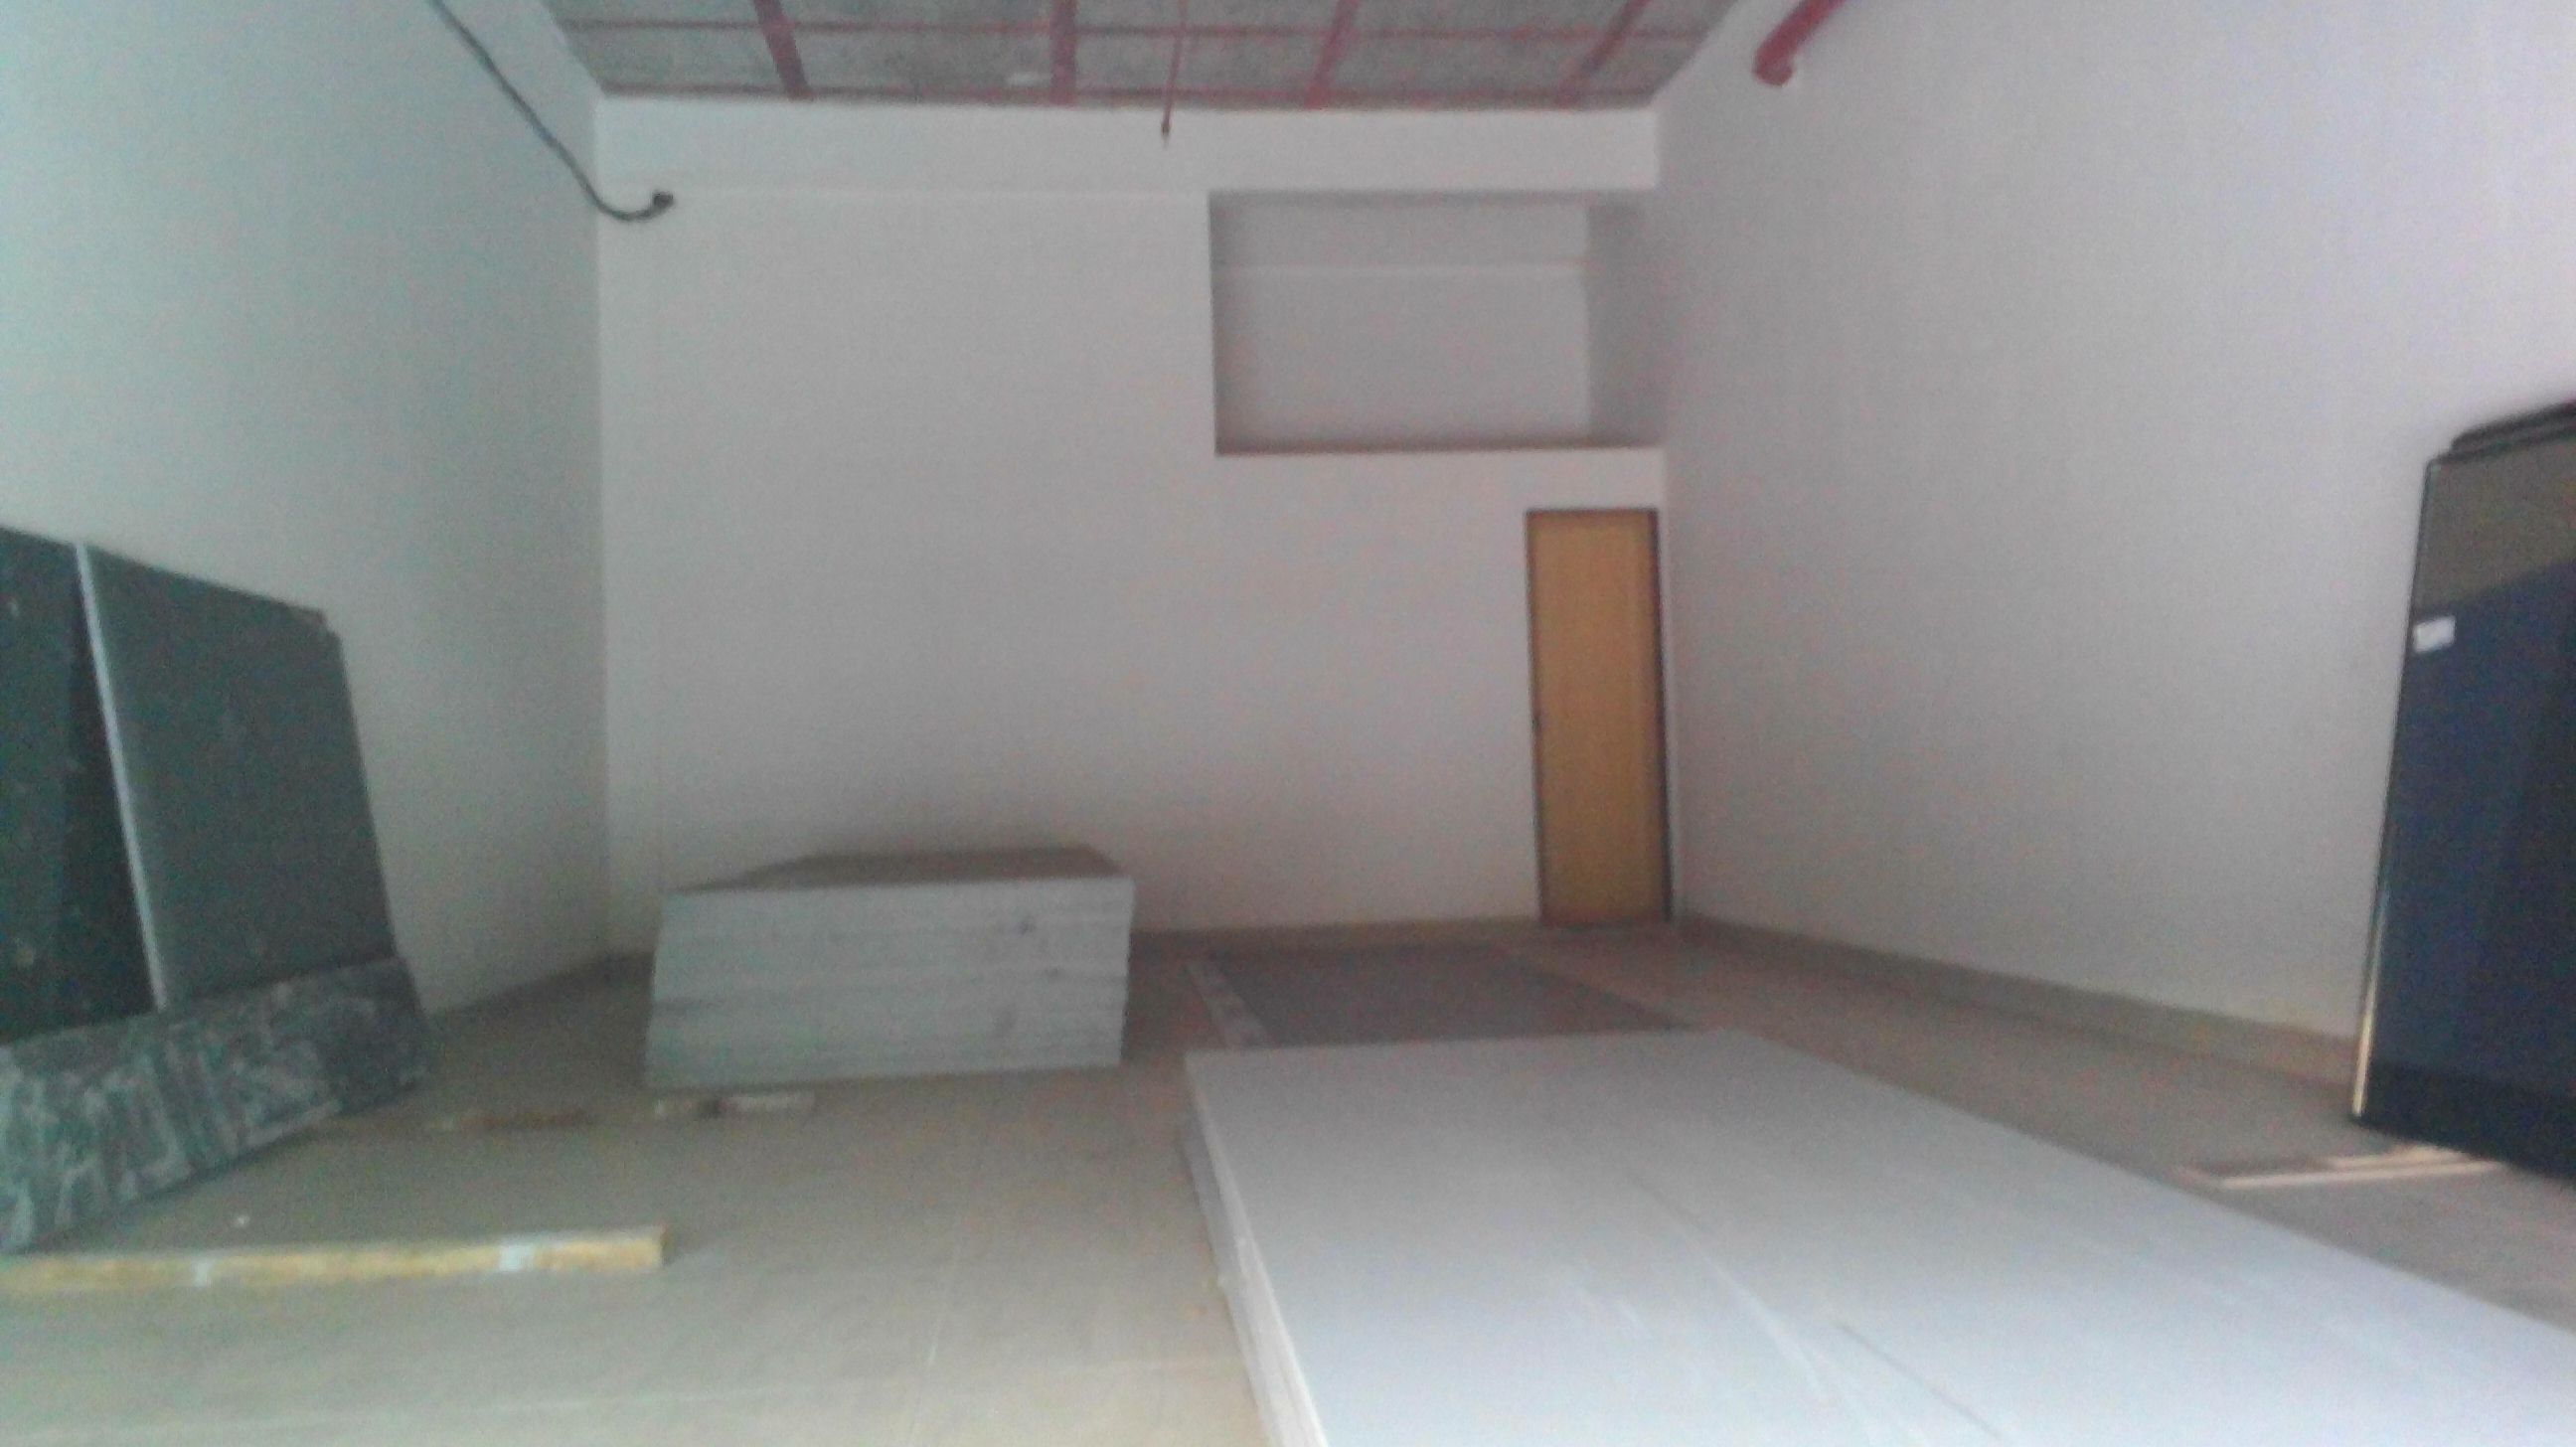 Commercial Shops for Rent in Haware  infotech Park, near by Inorbit Mall, , Vashi-West, Mumbai